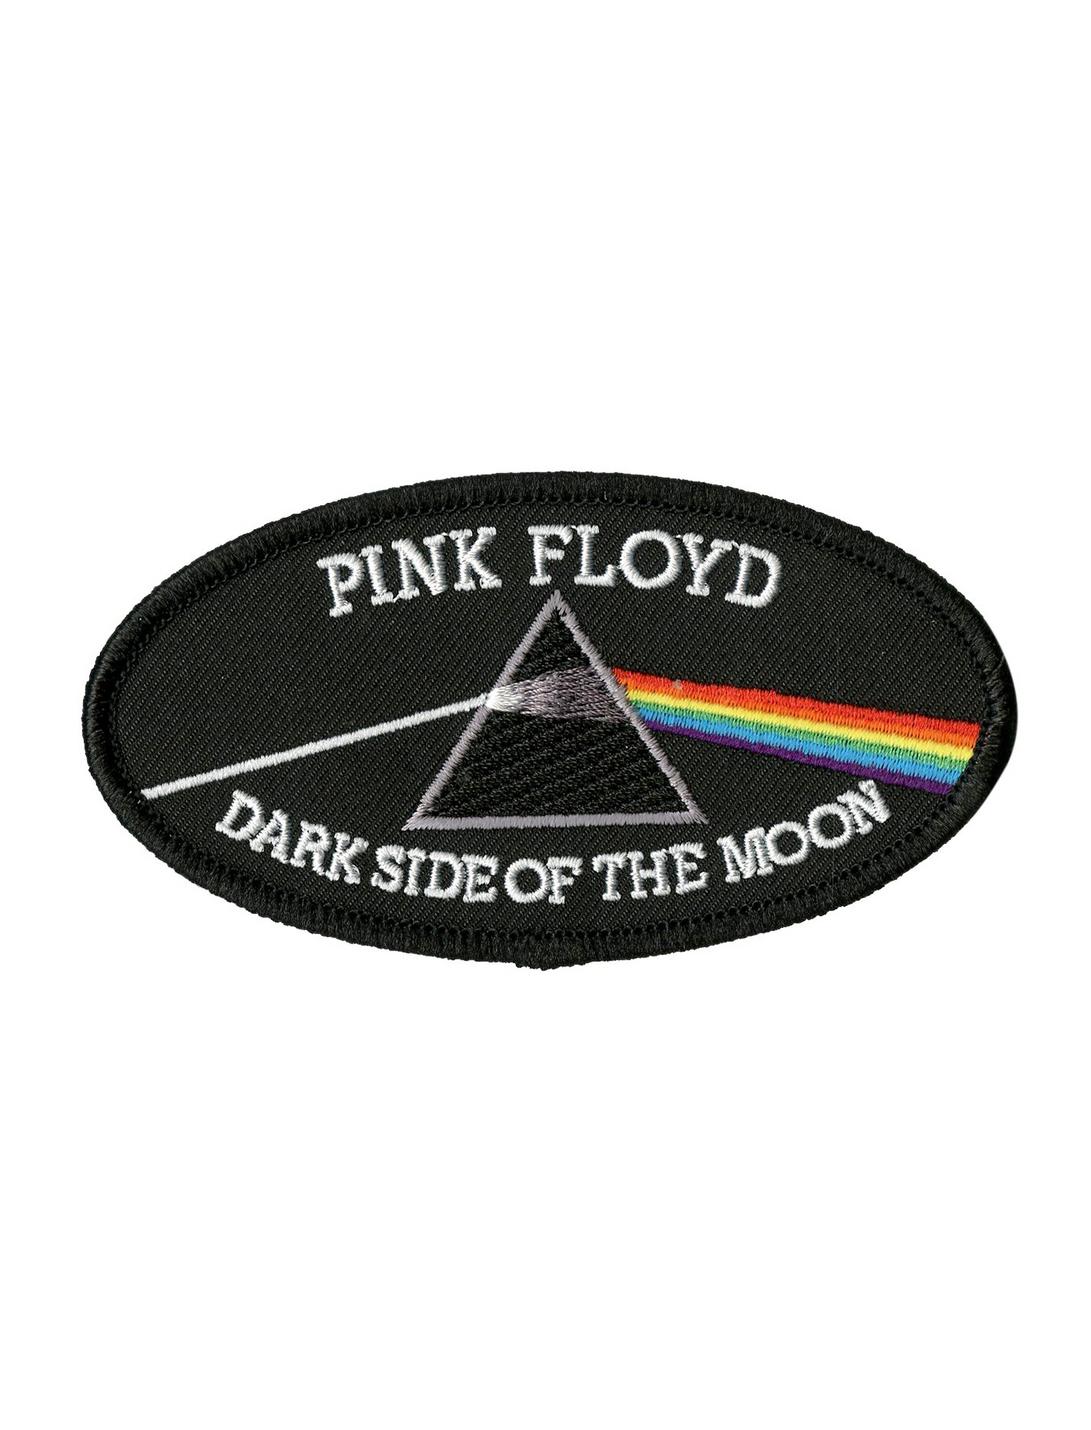 Pink Floyd Dark Side Of The Moon Iron-On Patch, , hi-res